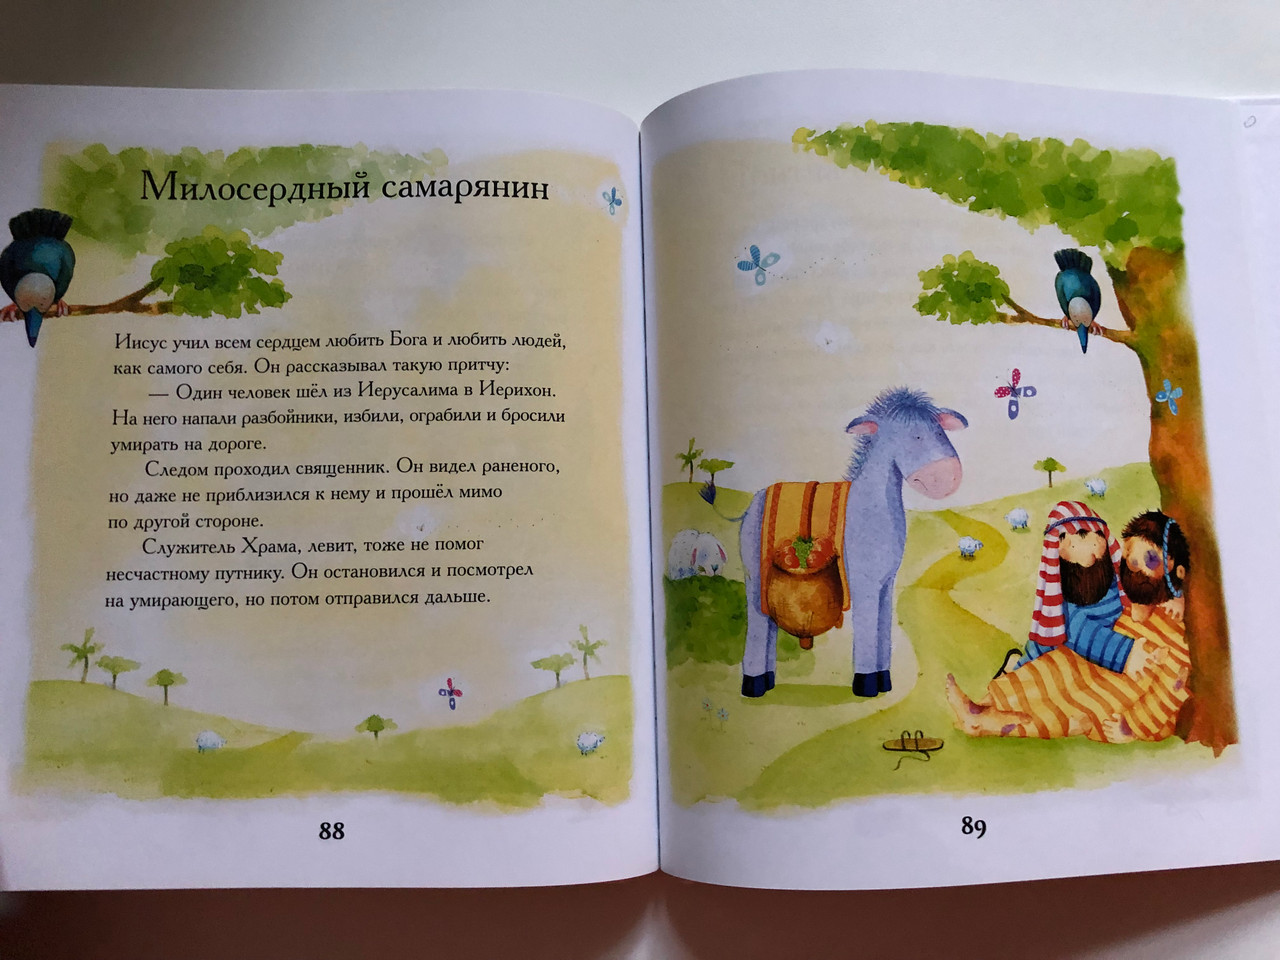 https://cdn10.bigcommerce.com/s-62bdpkt7pb/products/51169/images/260525/Russian_edition_of_A_Childs_Bible_11__97695.1670699391.1280.1280.JPG?c=2